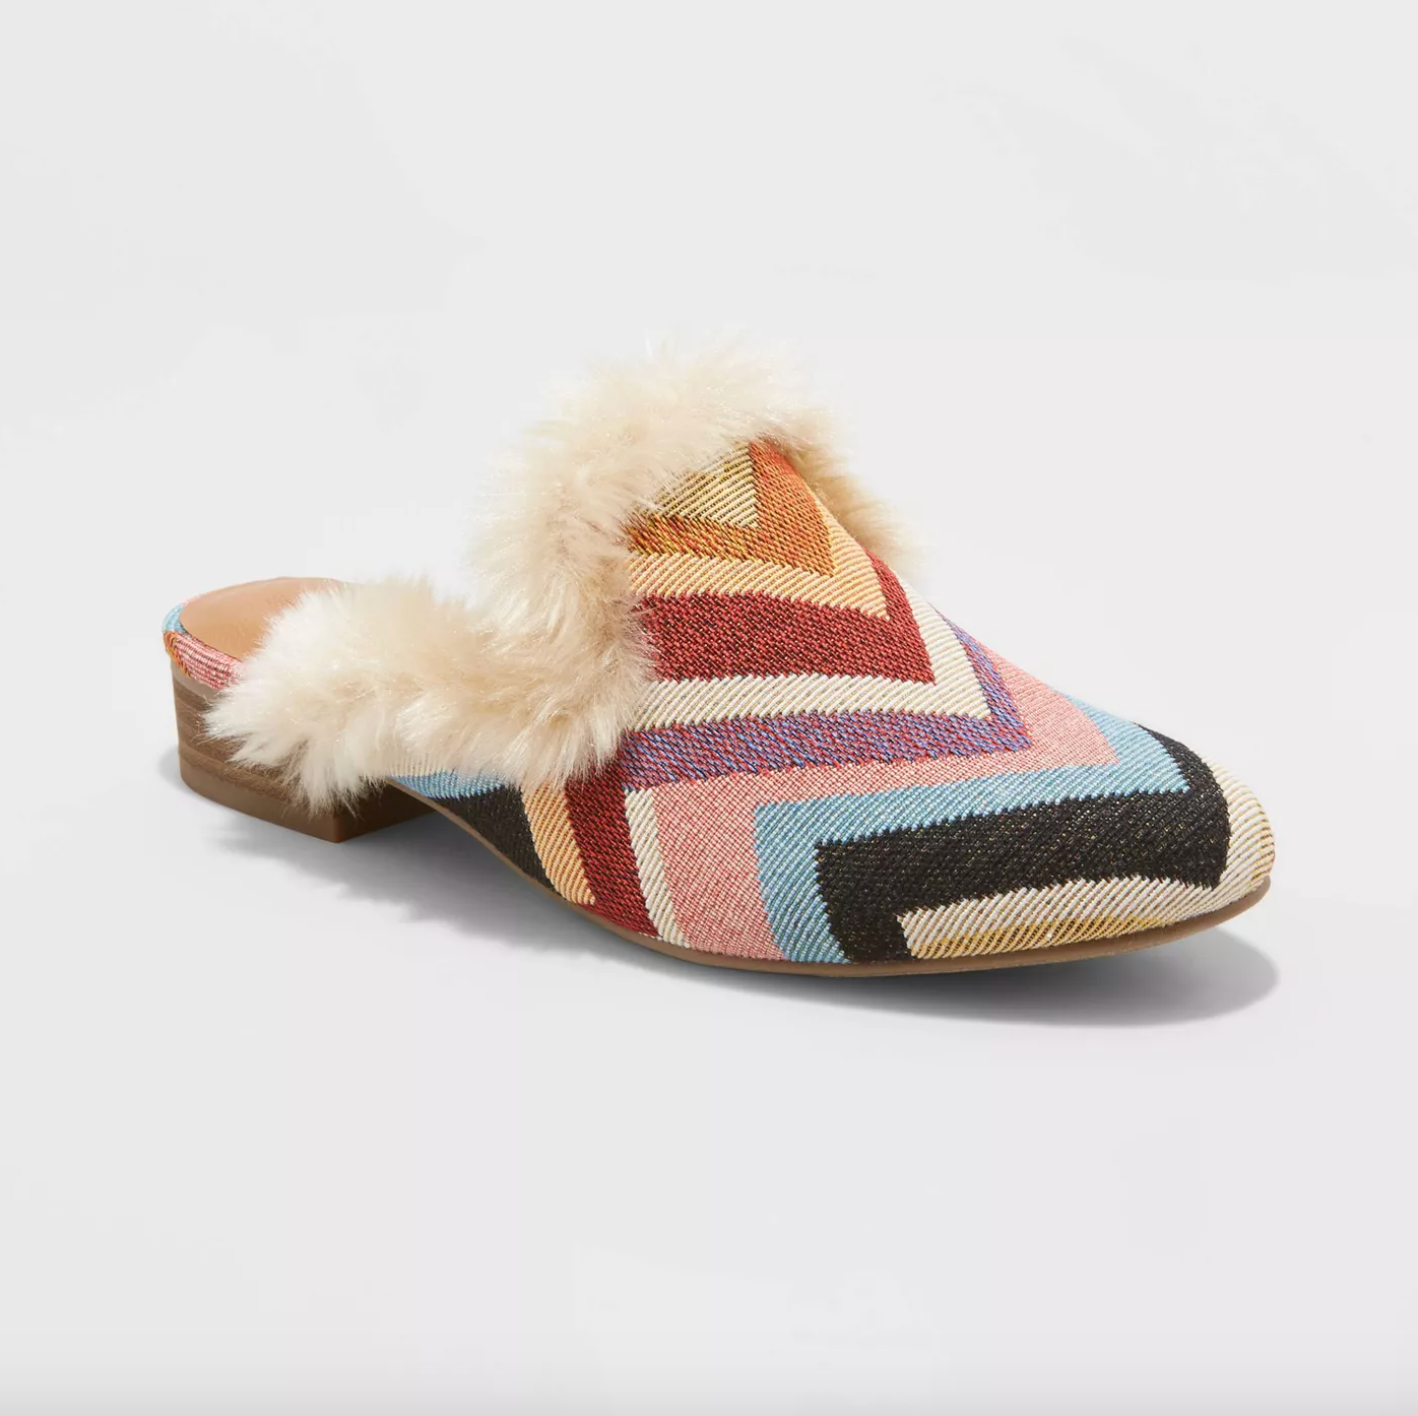 clogs with fur inside